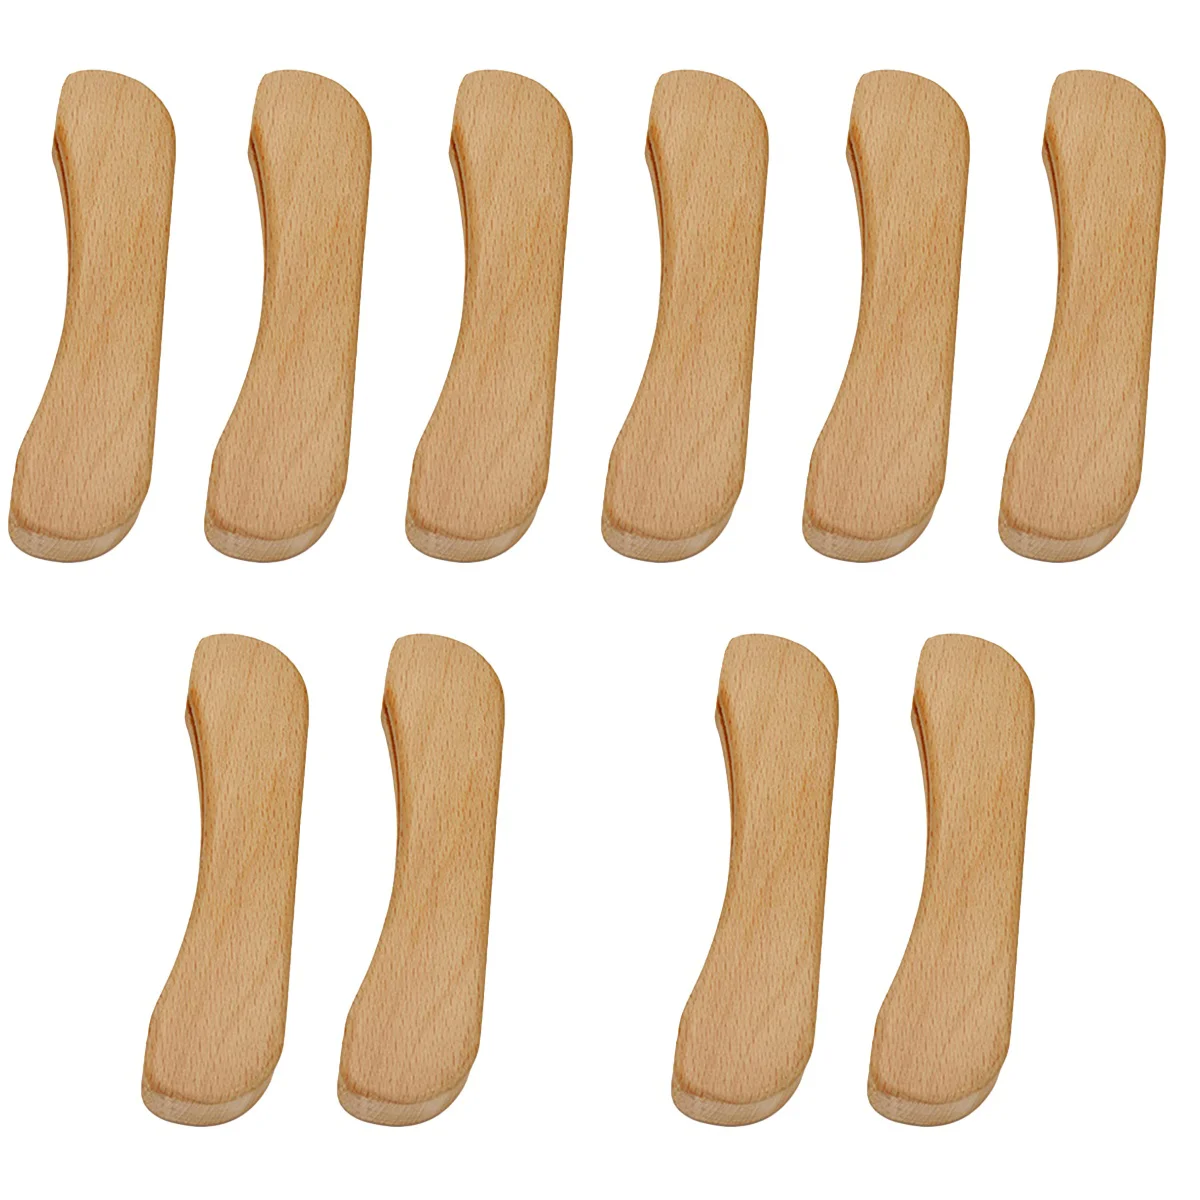 

10 Pcs Frying Pan Handle Covers Wooden Insulated Covers Anti-scald Wok Handle Handle